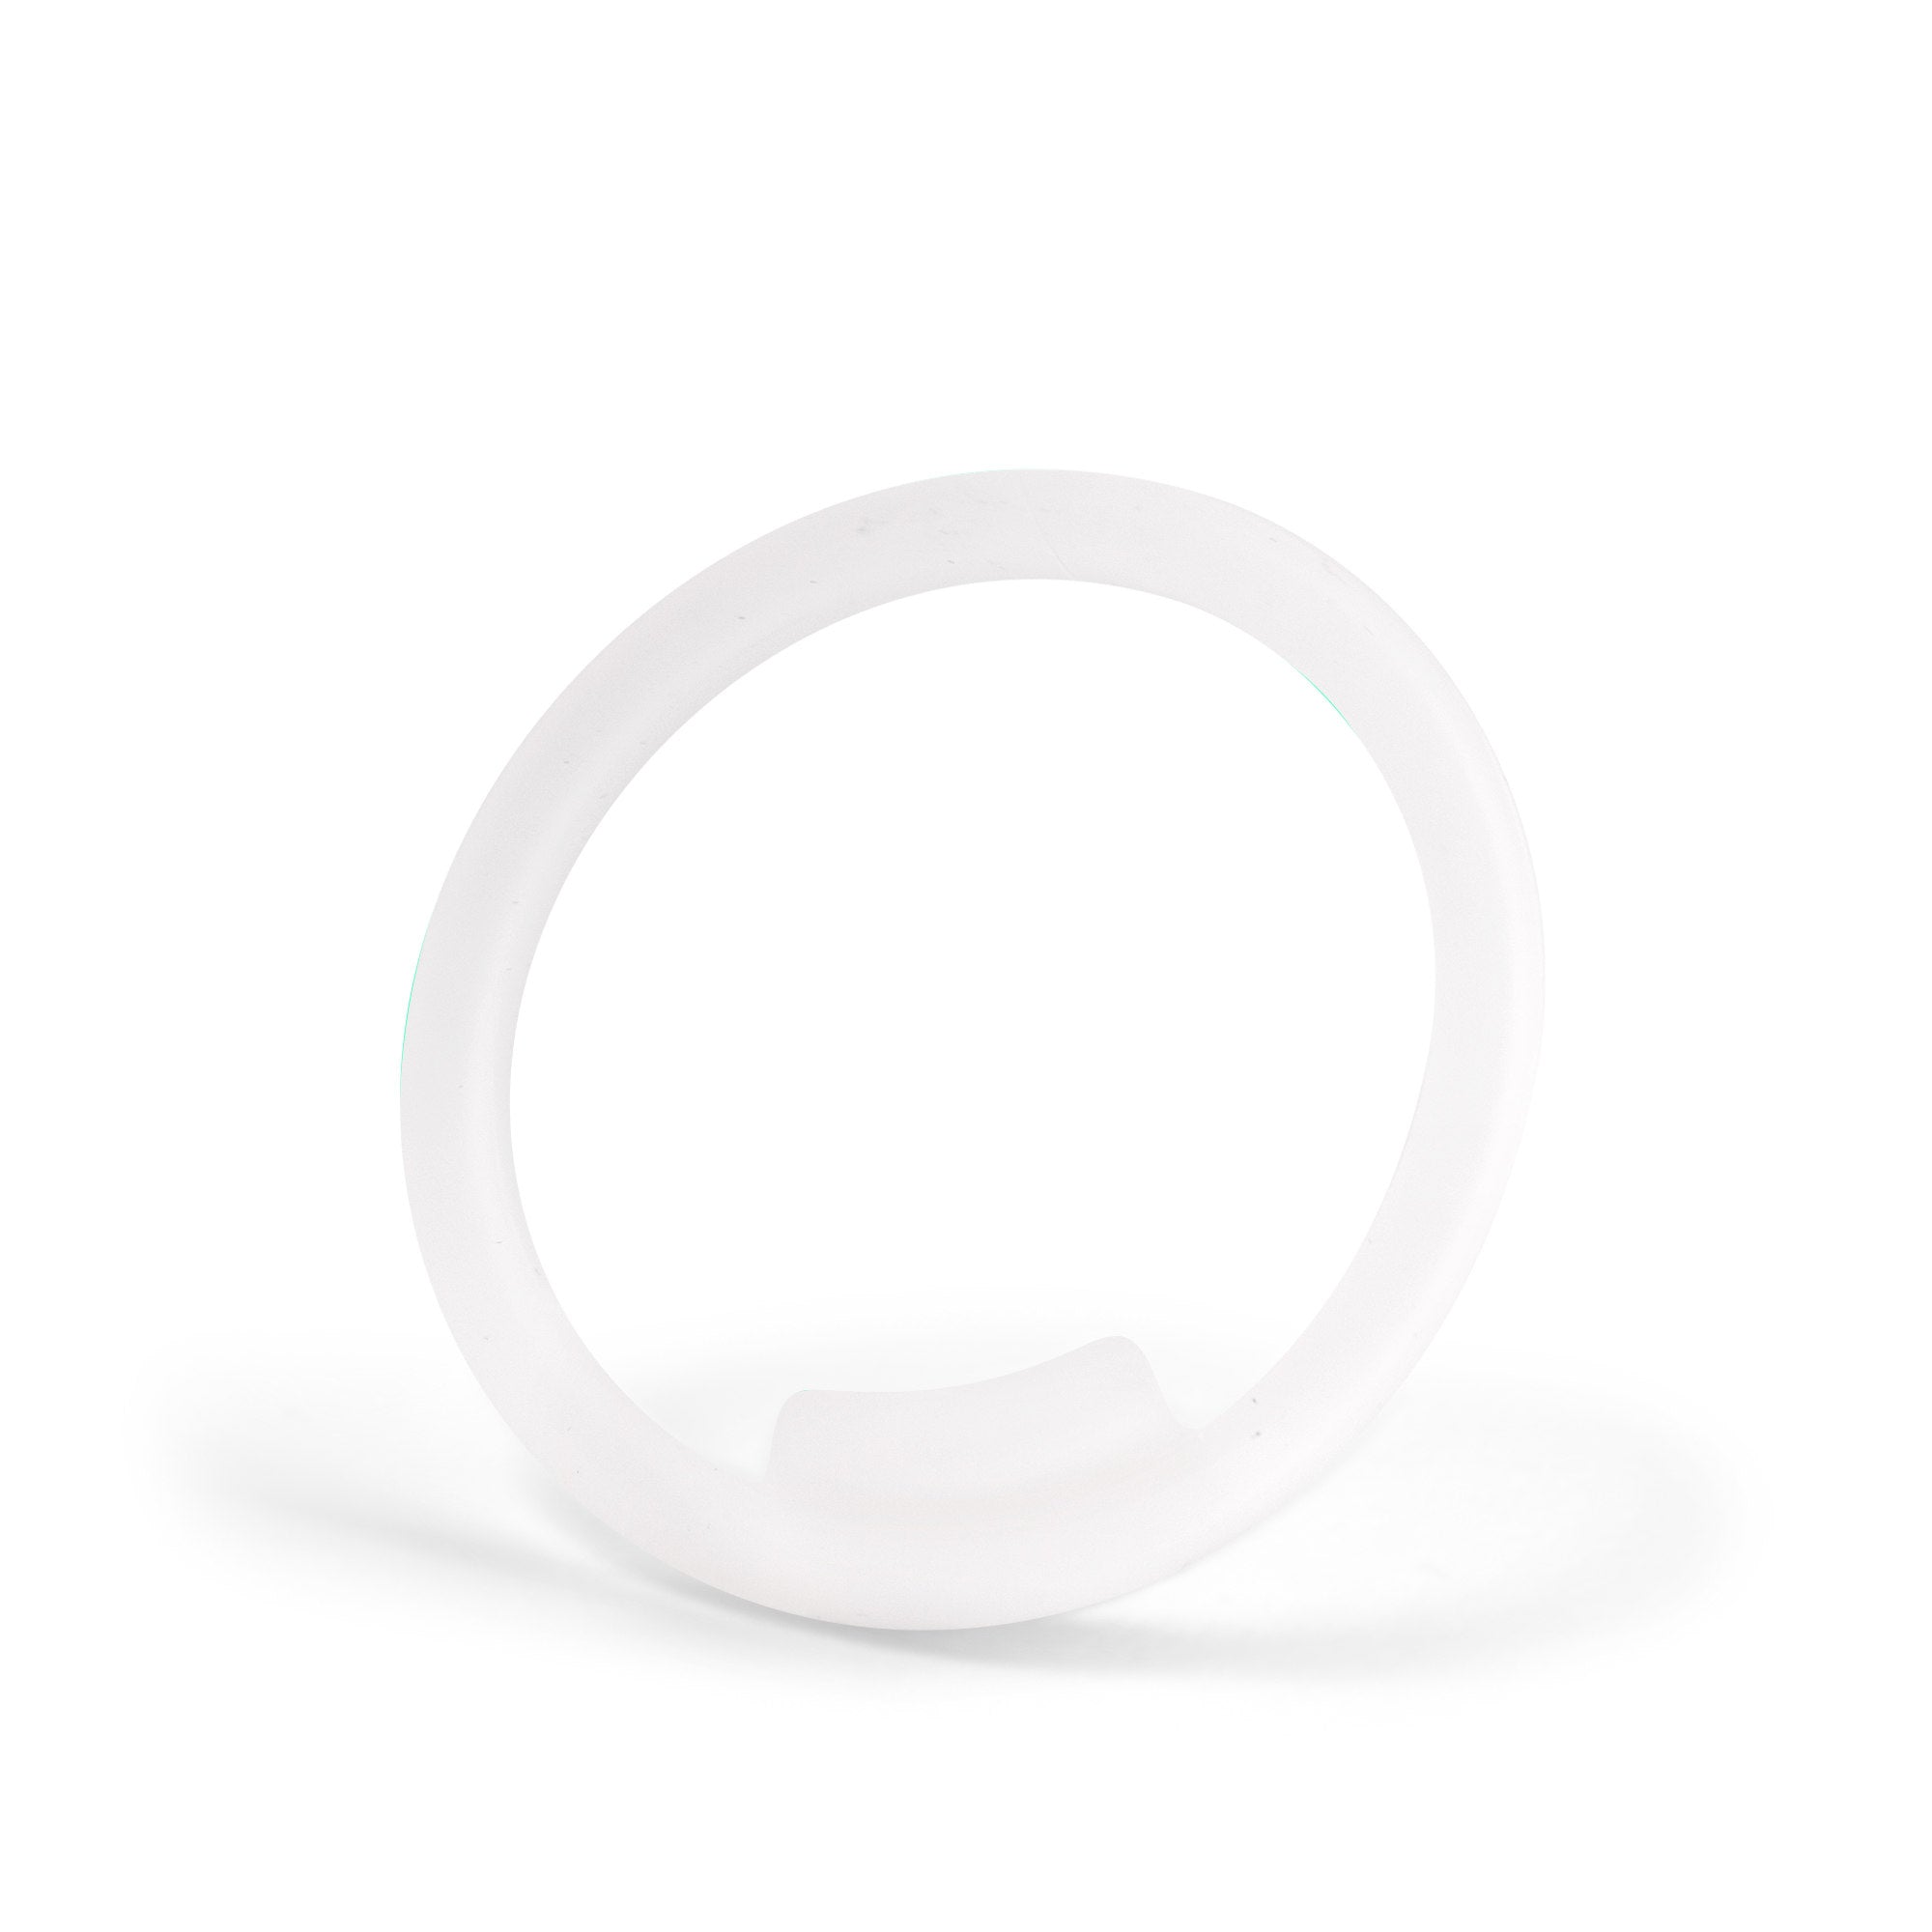 Buy Wide & Standard Mouth Silicone Gasket 